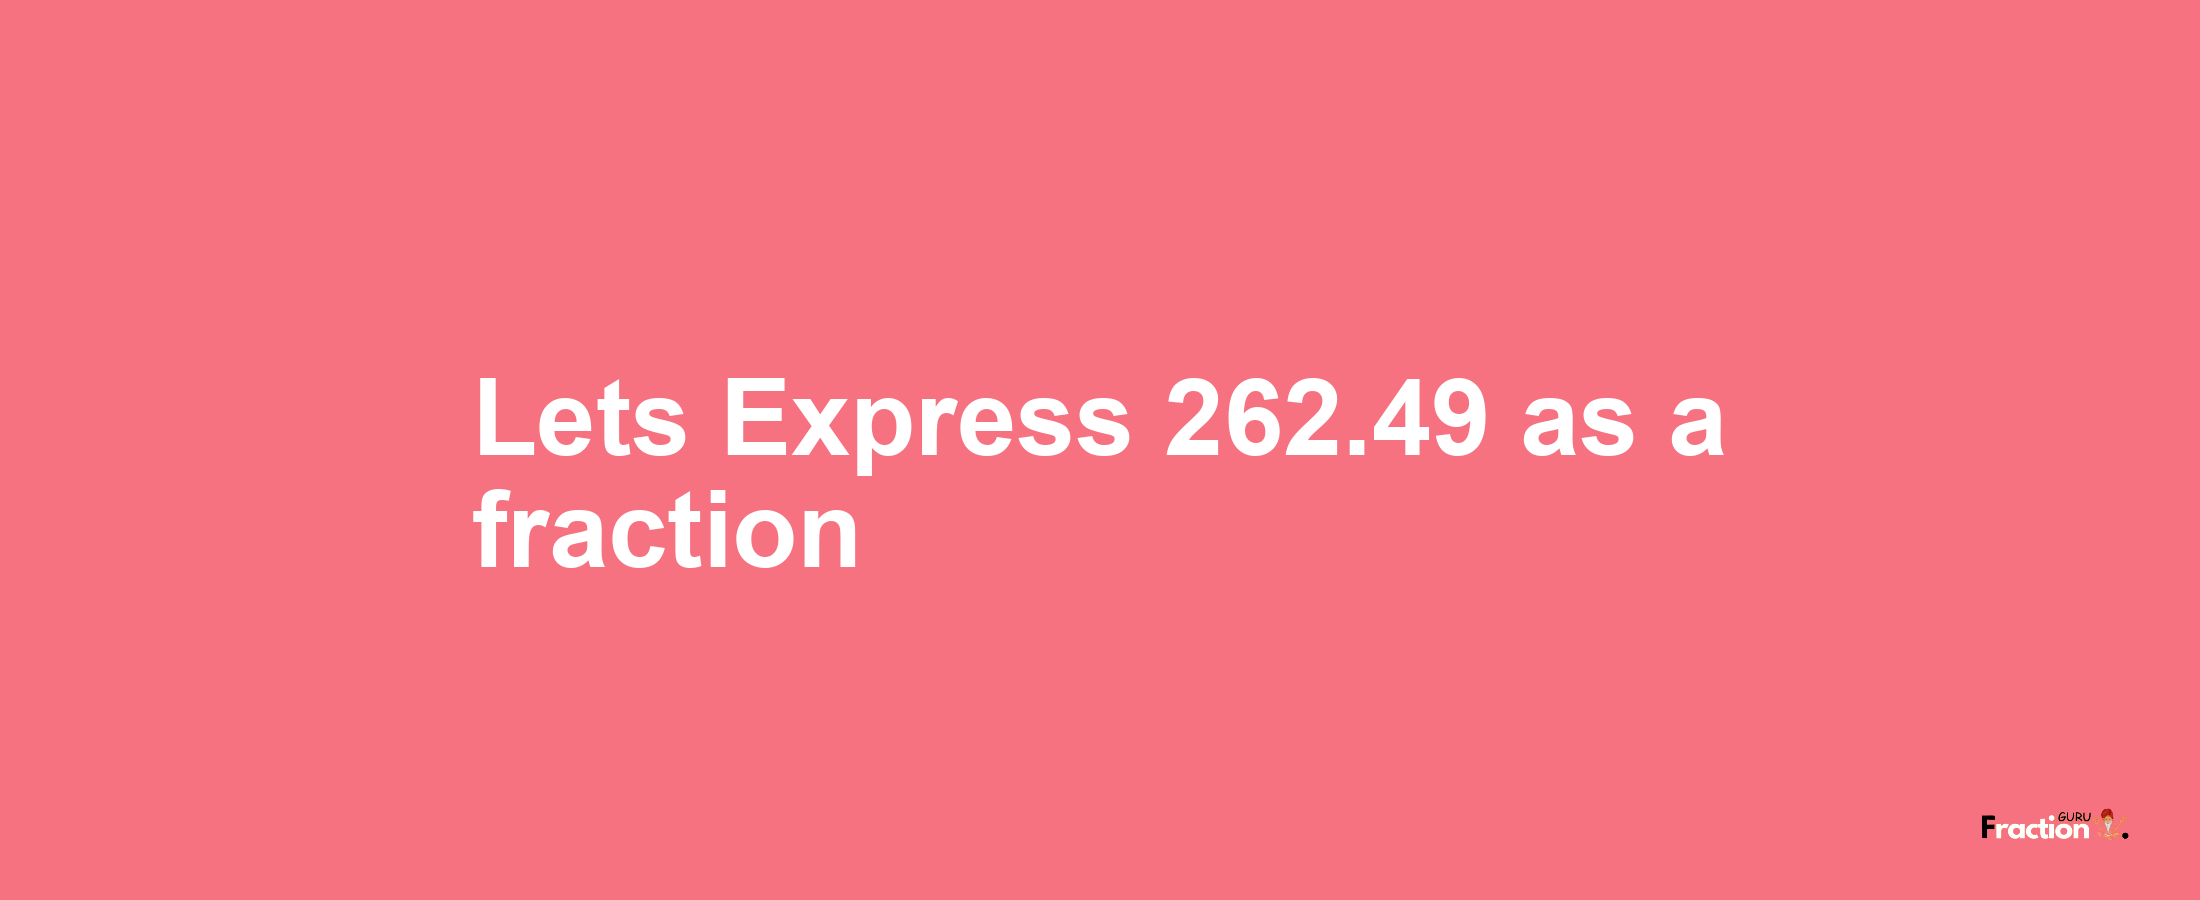 Lets Express 262.49 as afraction